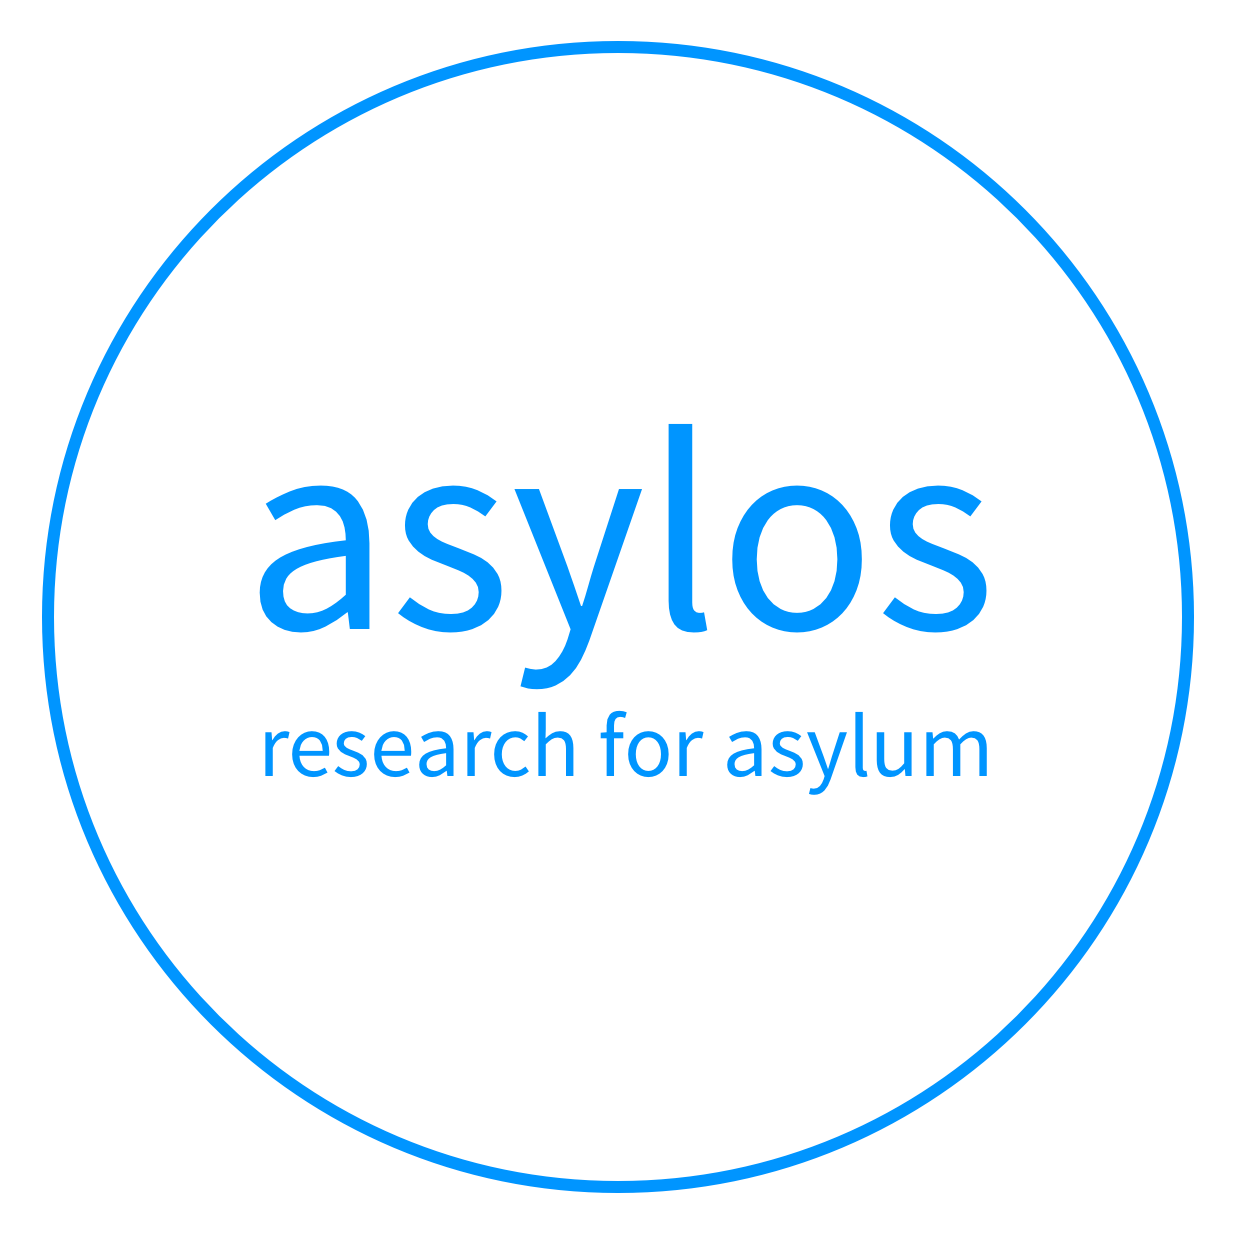 research for asylum ⁞ we investigate human rights abuses to help asylum lawyers and NGOs defend refugees #proofnotprejudice

Defend asylum - https://t.co/bescPfotX7